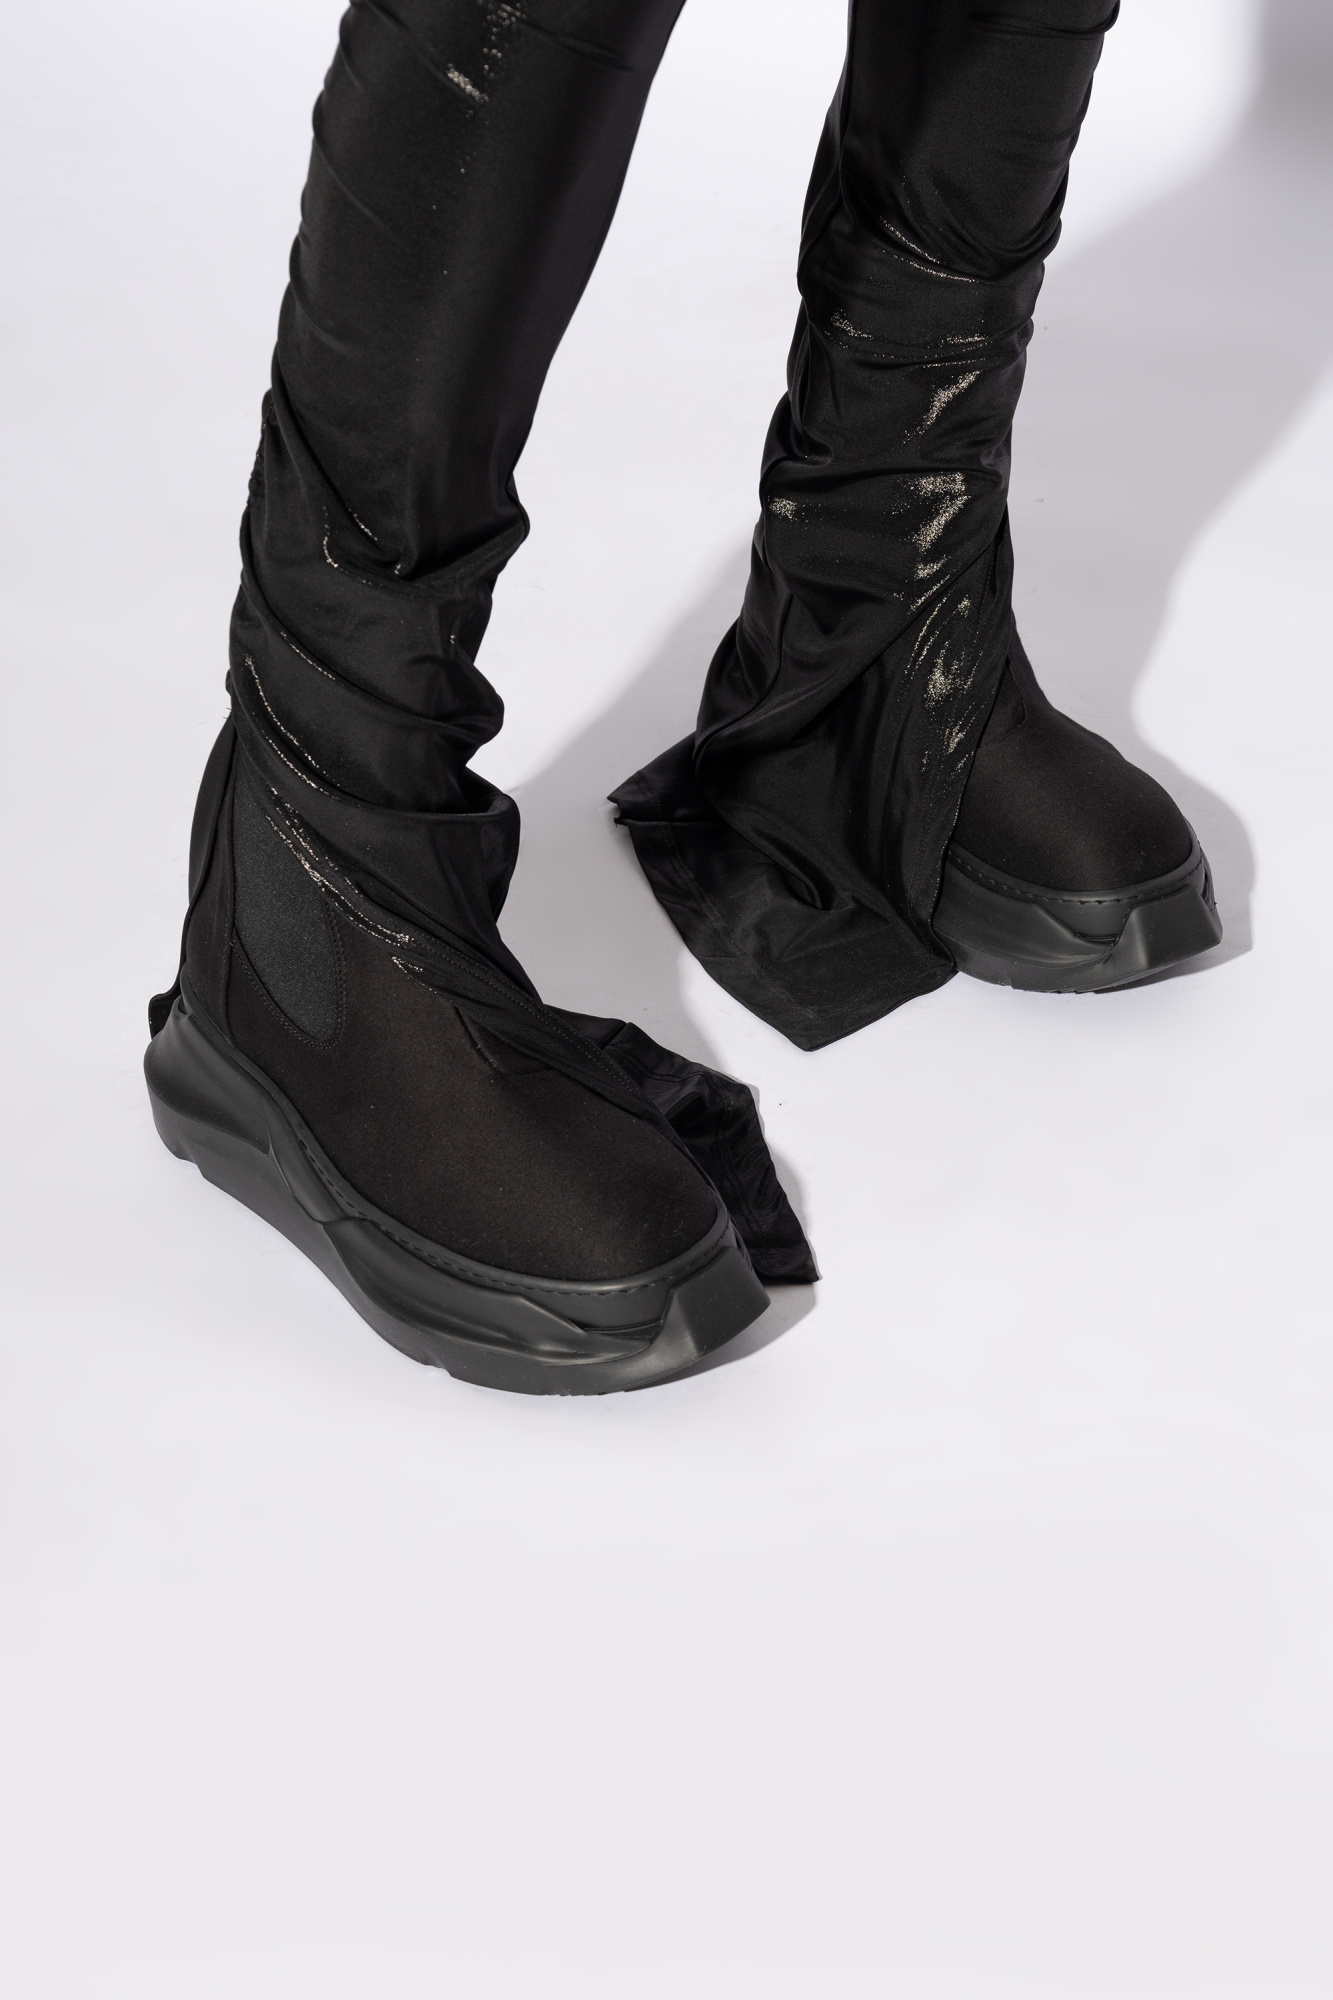 Black 'Beatle Abstract' Chelsea Boots Rick Owens DRKSHDW - GIVENCHY HEELED  BOOTS - Tgkb5Shops AE